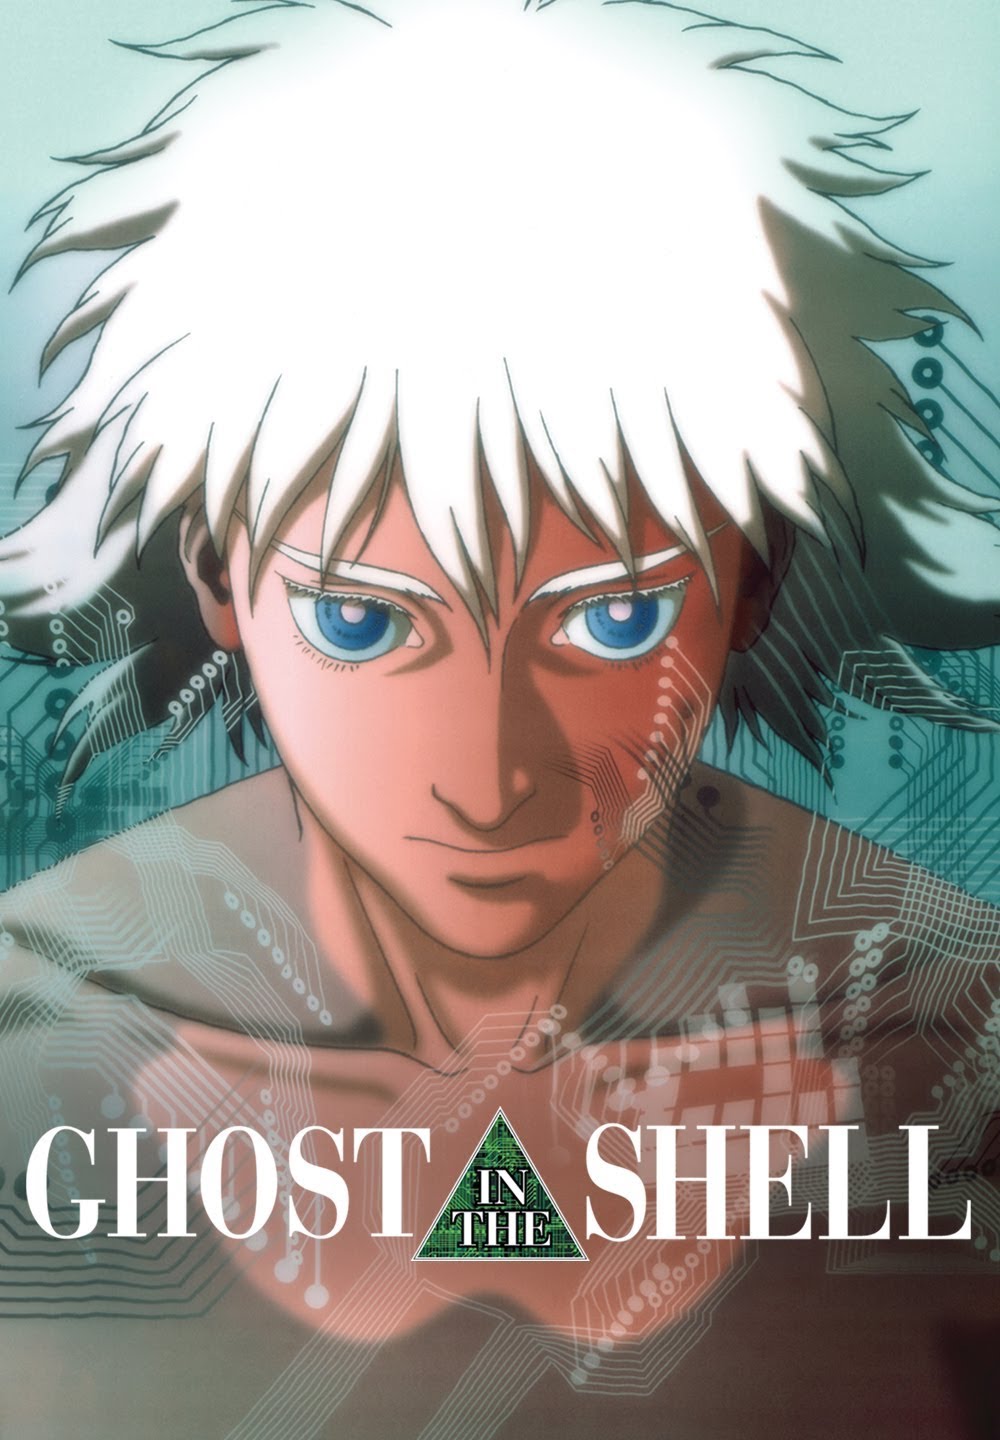 Ghost in the shell [HD] (1995)